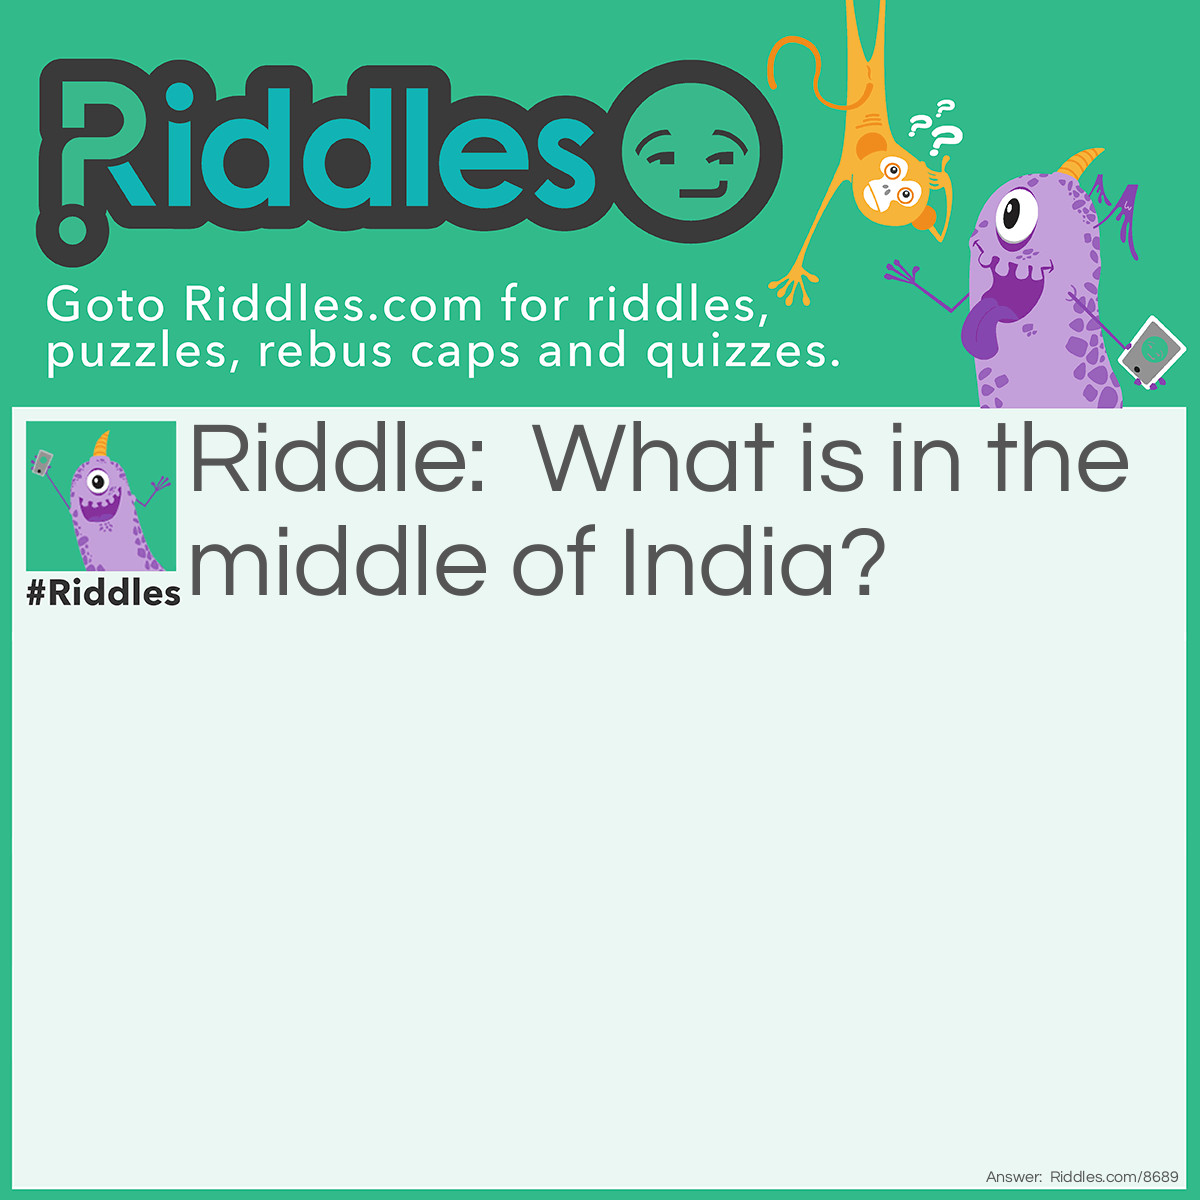 Riddle: What is in the middle of India? Answer: The letter 'd'!